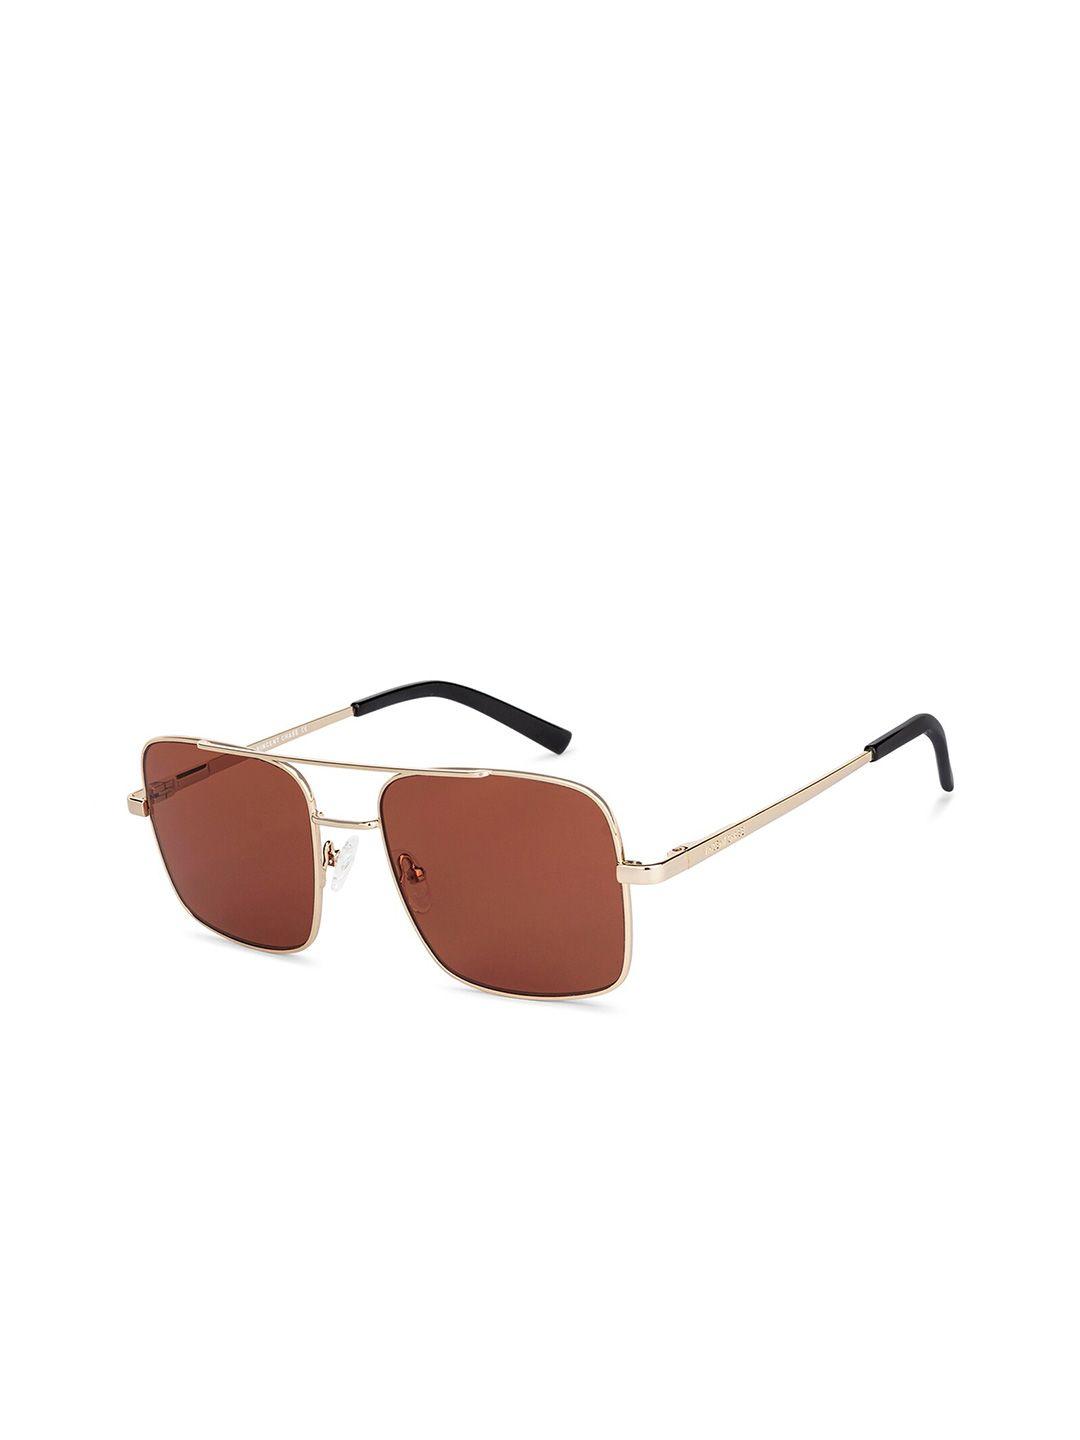 vincent chase unisex brown lens & gold-toned square sunglasses with uv protected lens